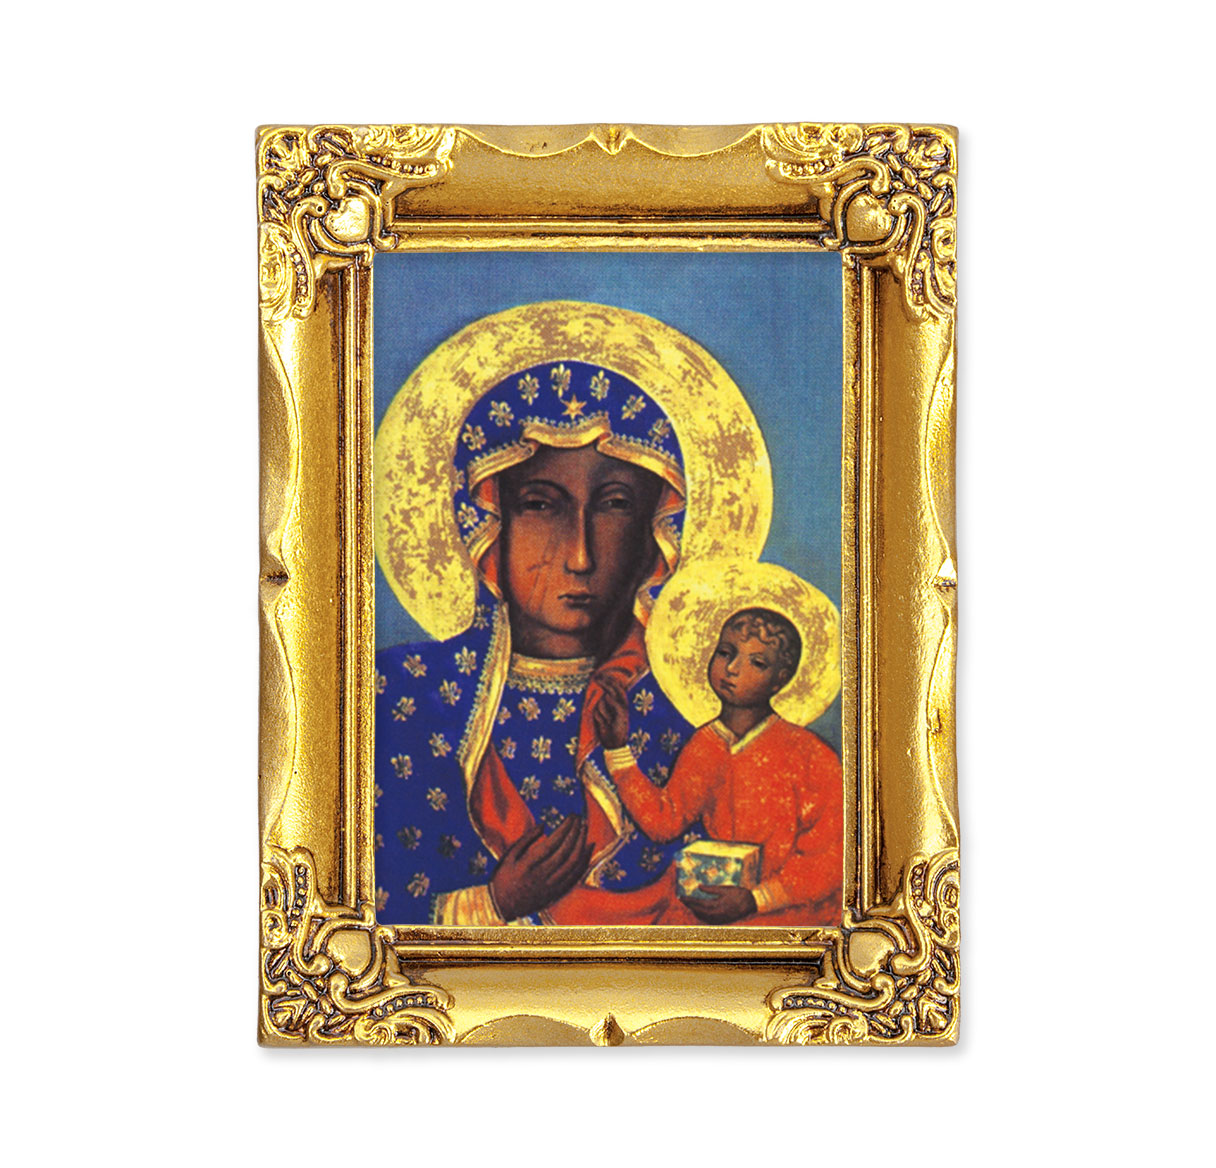 Our Lady of Czestochowa Antique Gold Framed Art